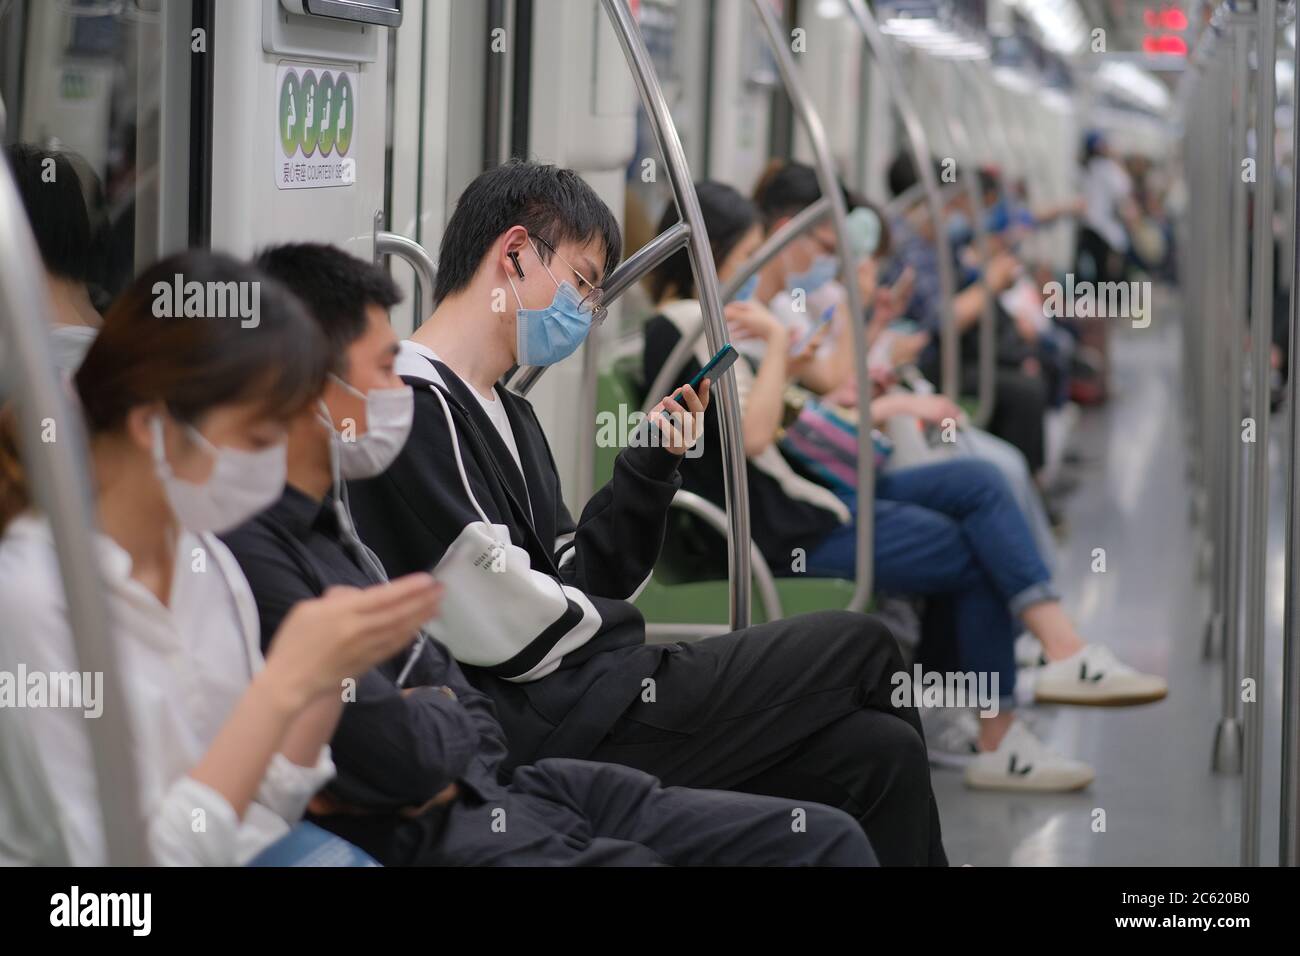 To prevent infection of coronavirus COVID-19, passengers wearing surgical mask sitting in subway train in China . Stock Photo